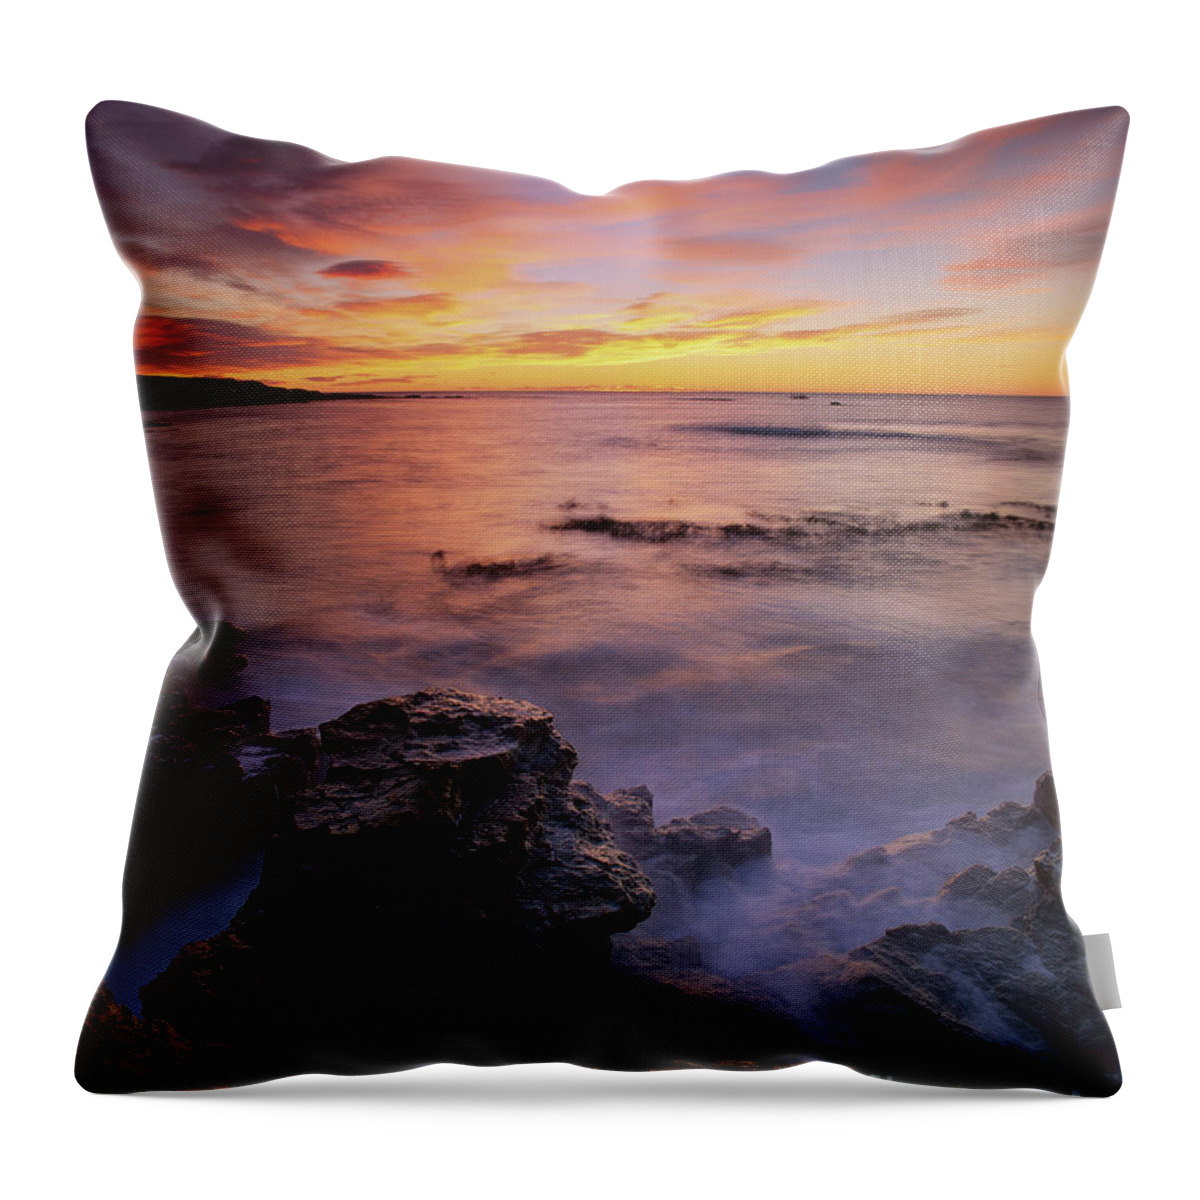 Hh Throw Pillow featuring the photograph Shag Point Waves at Sunset by Harley Betts